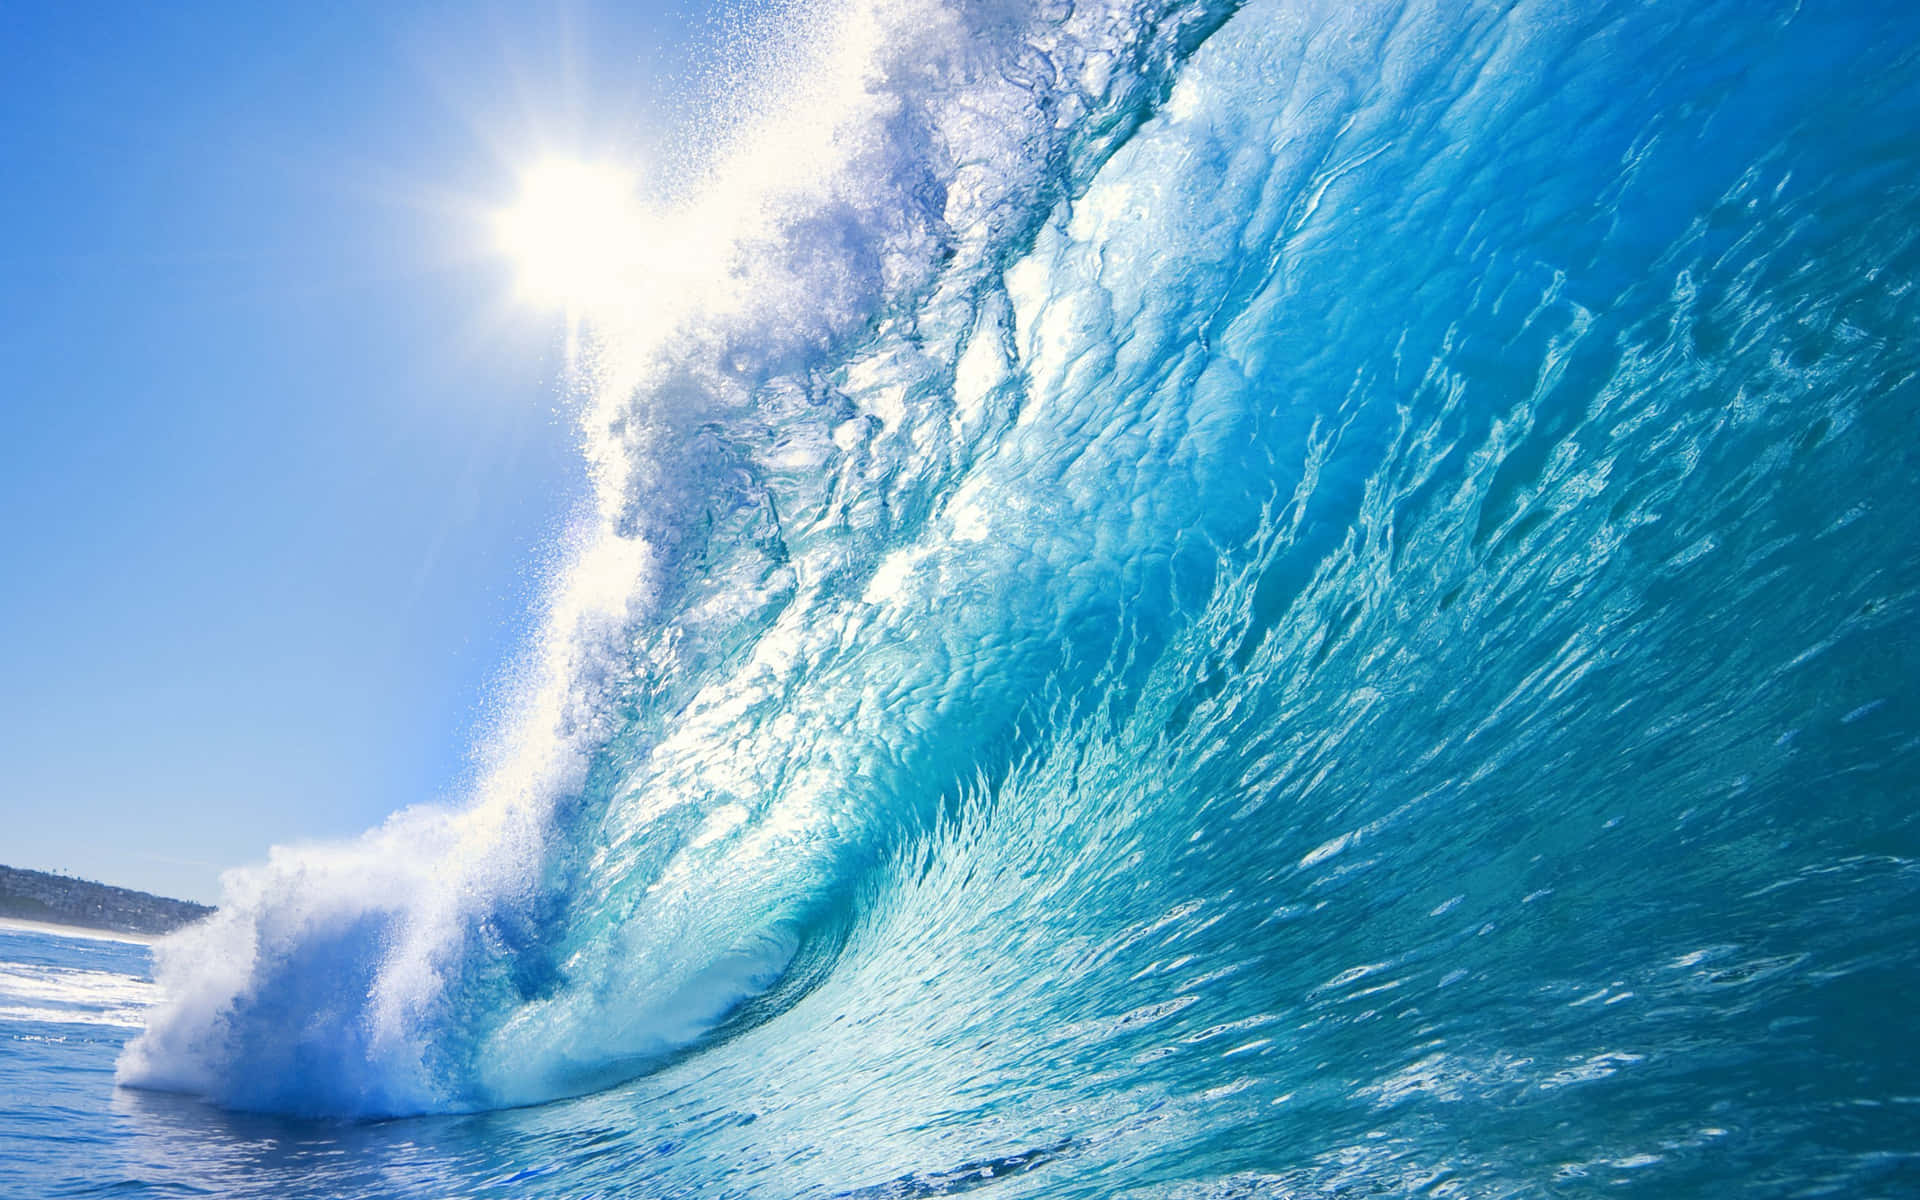 Find your inner harmony in the midst of life's tidal wave.